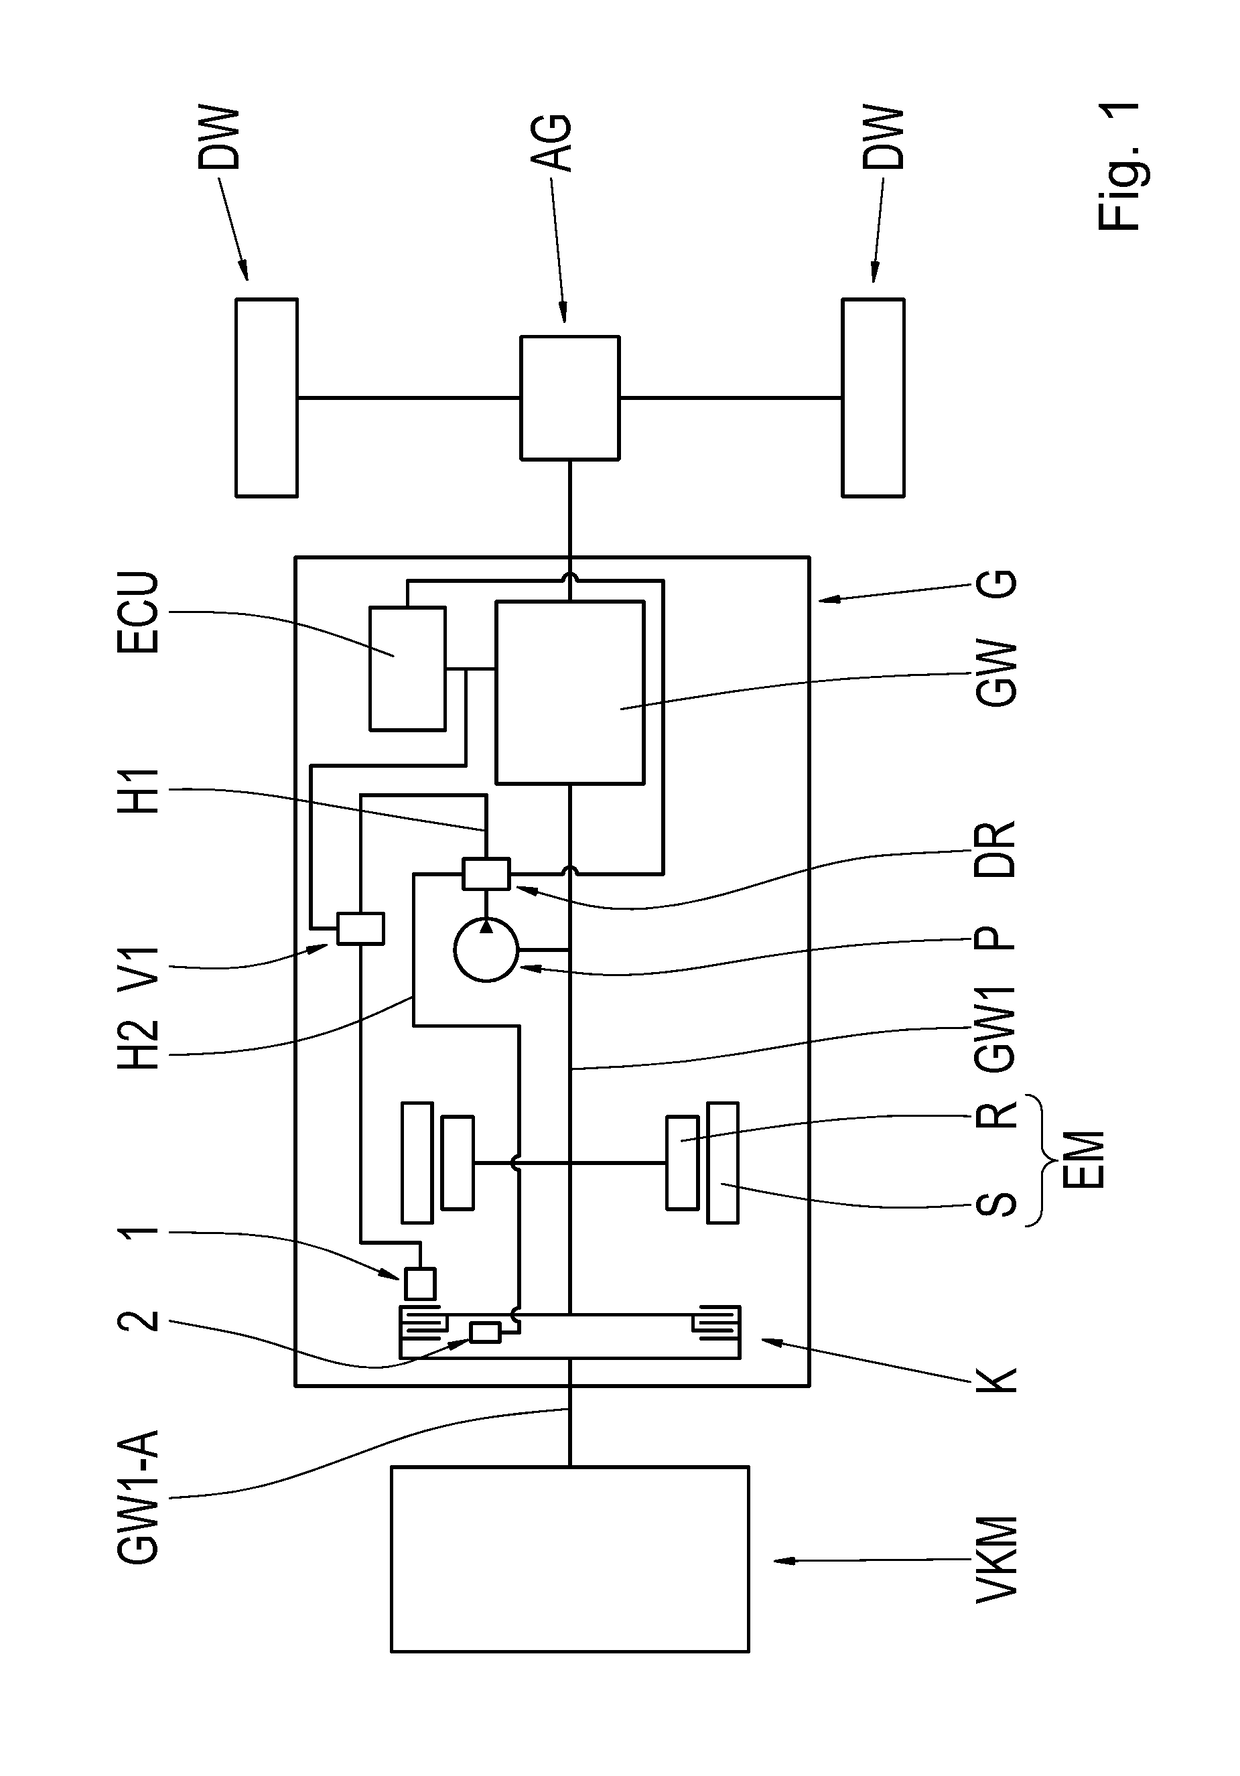 Method for Controlling an Hydraulically Actuated Shifting Element of a Vehicle Transmission